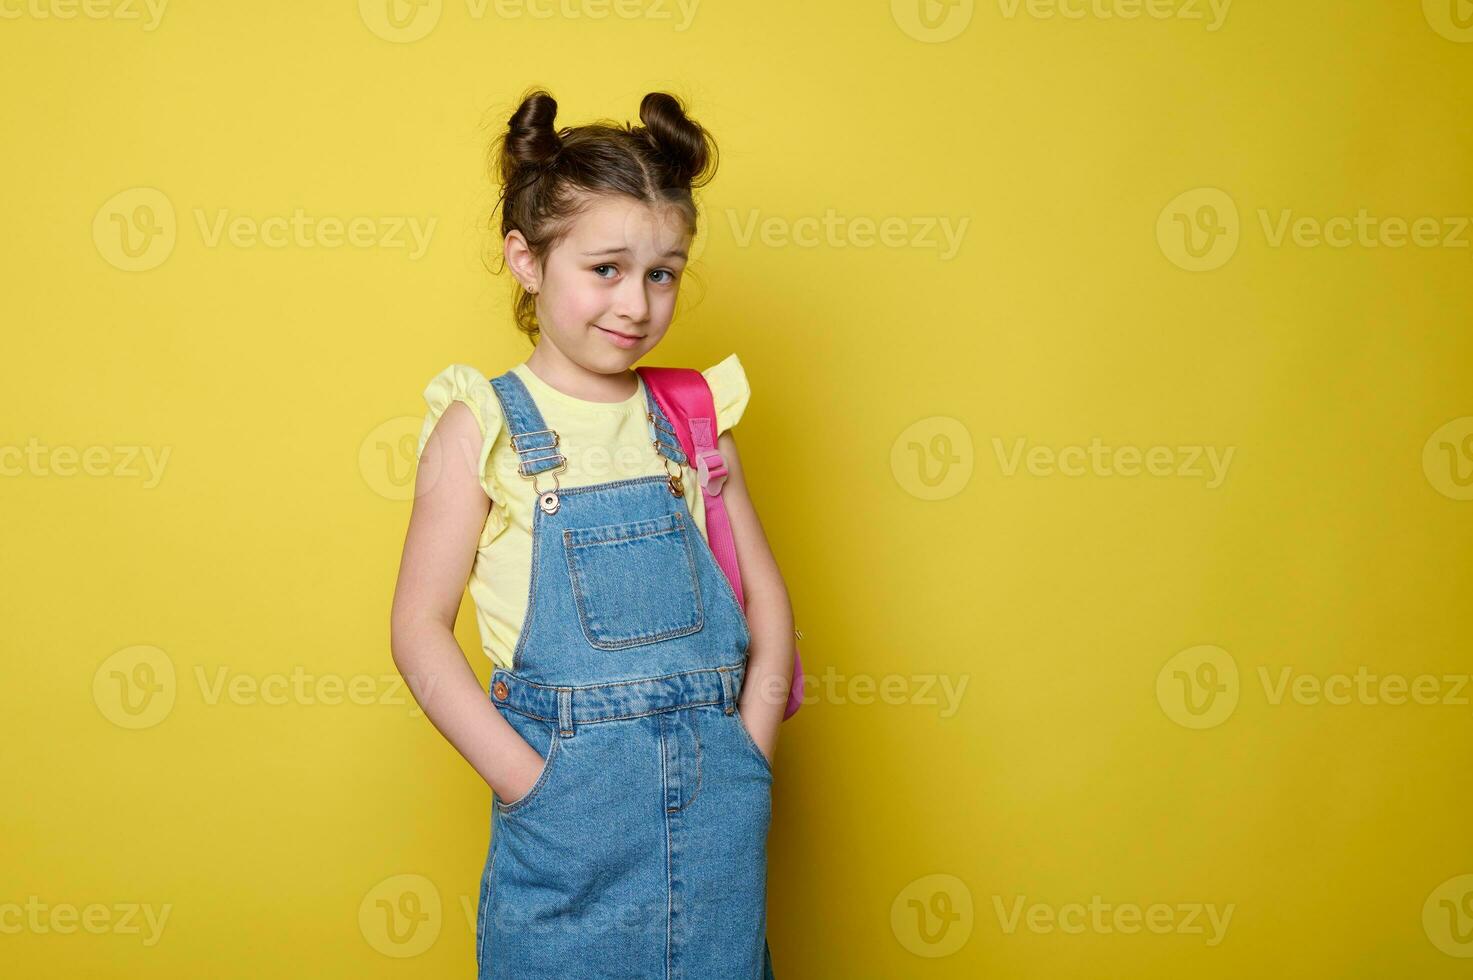 Adorable school girl in blue denim overalls, carrying a pink backpack, posing with hands in pockets on yellow background photo